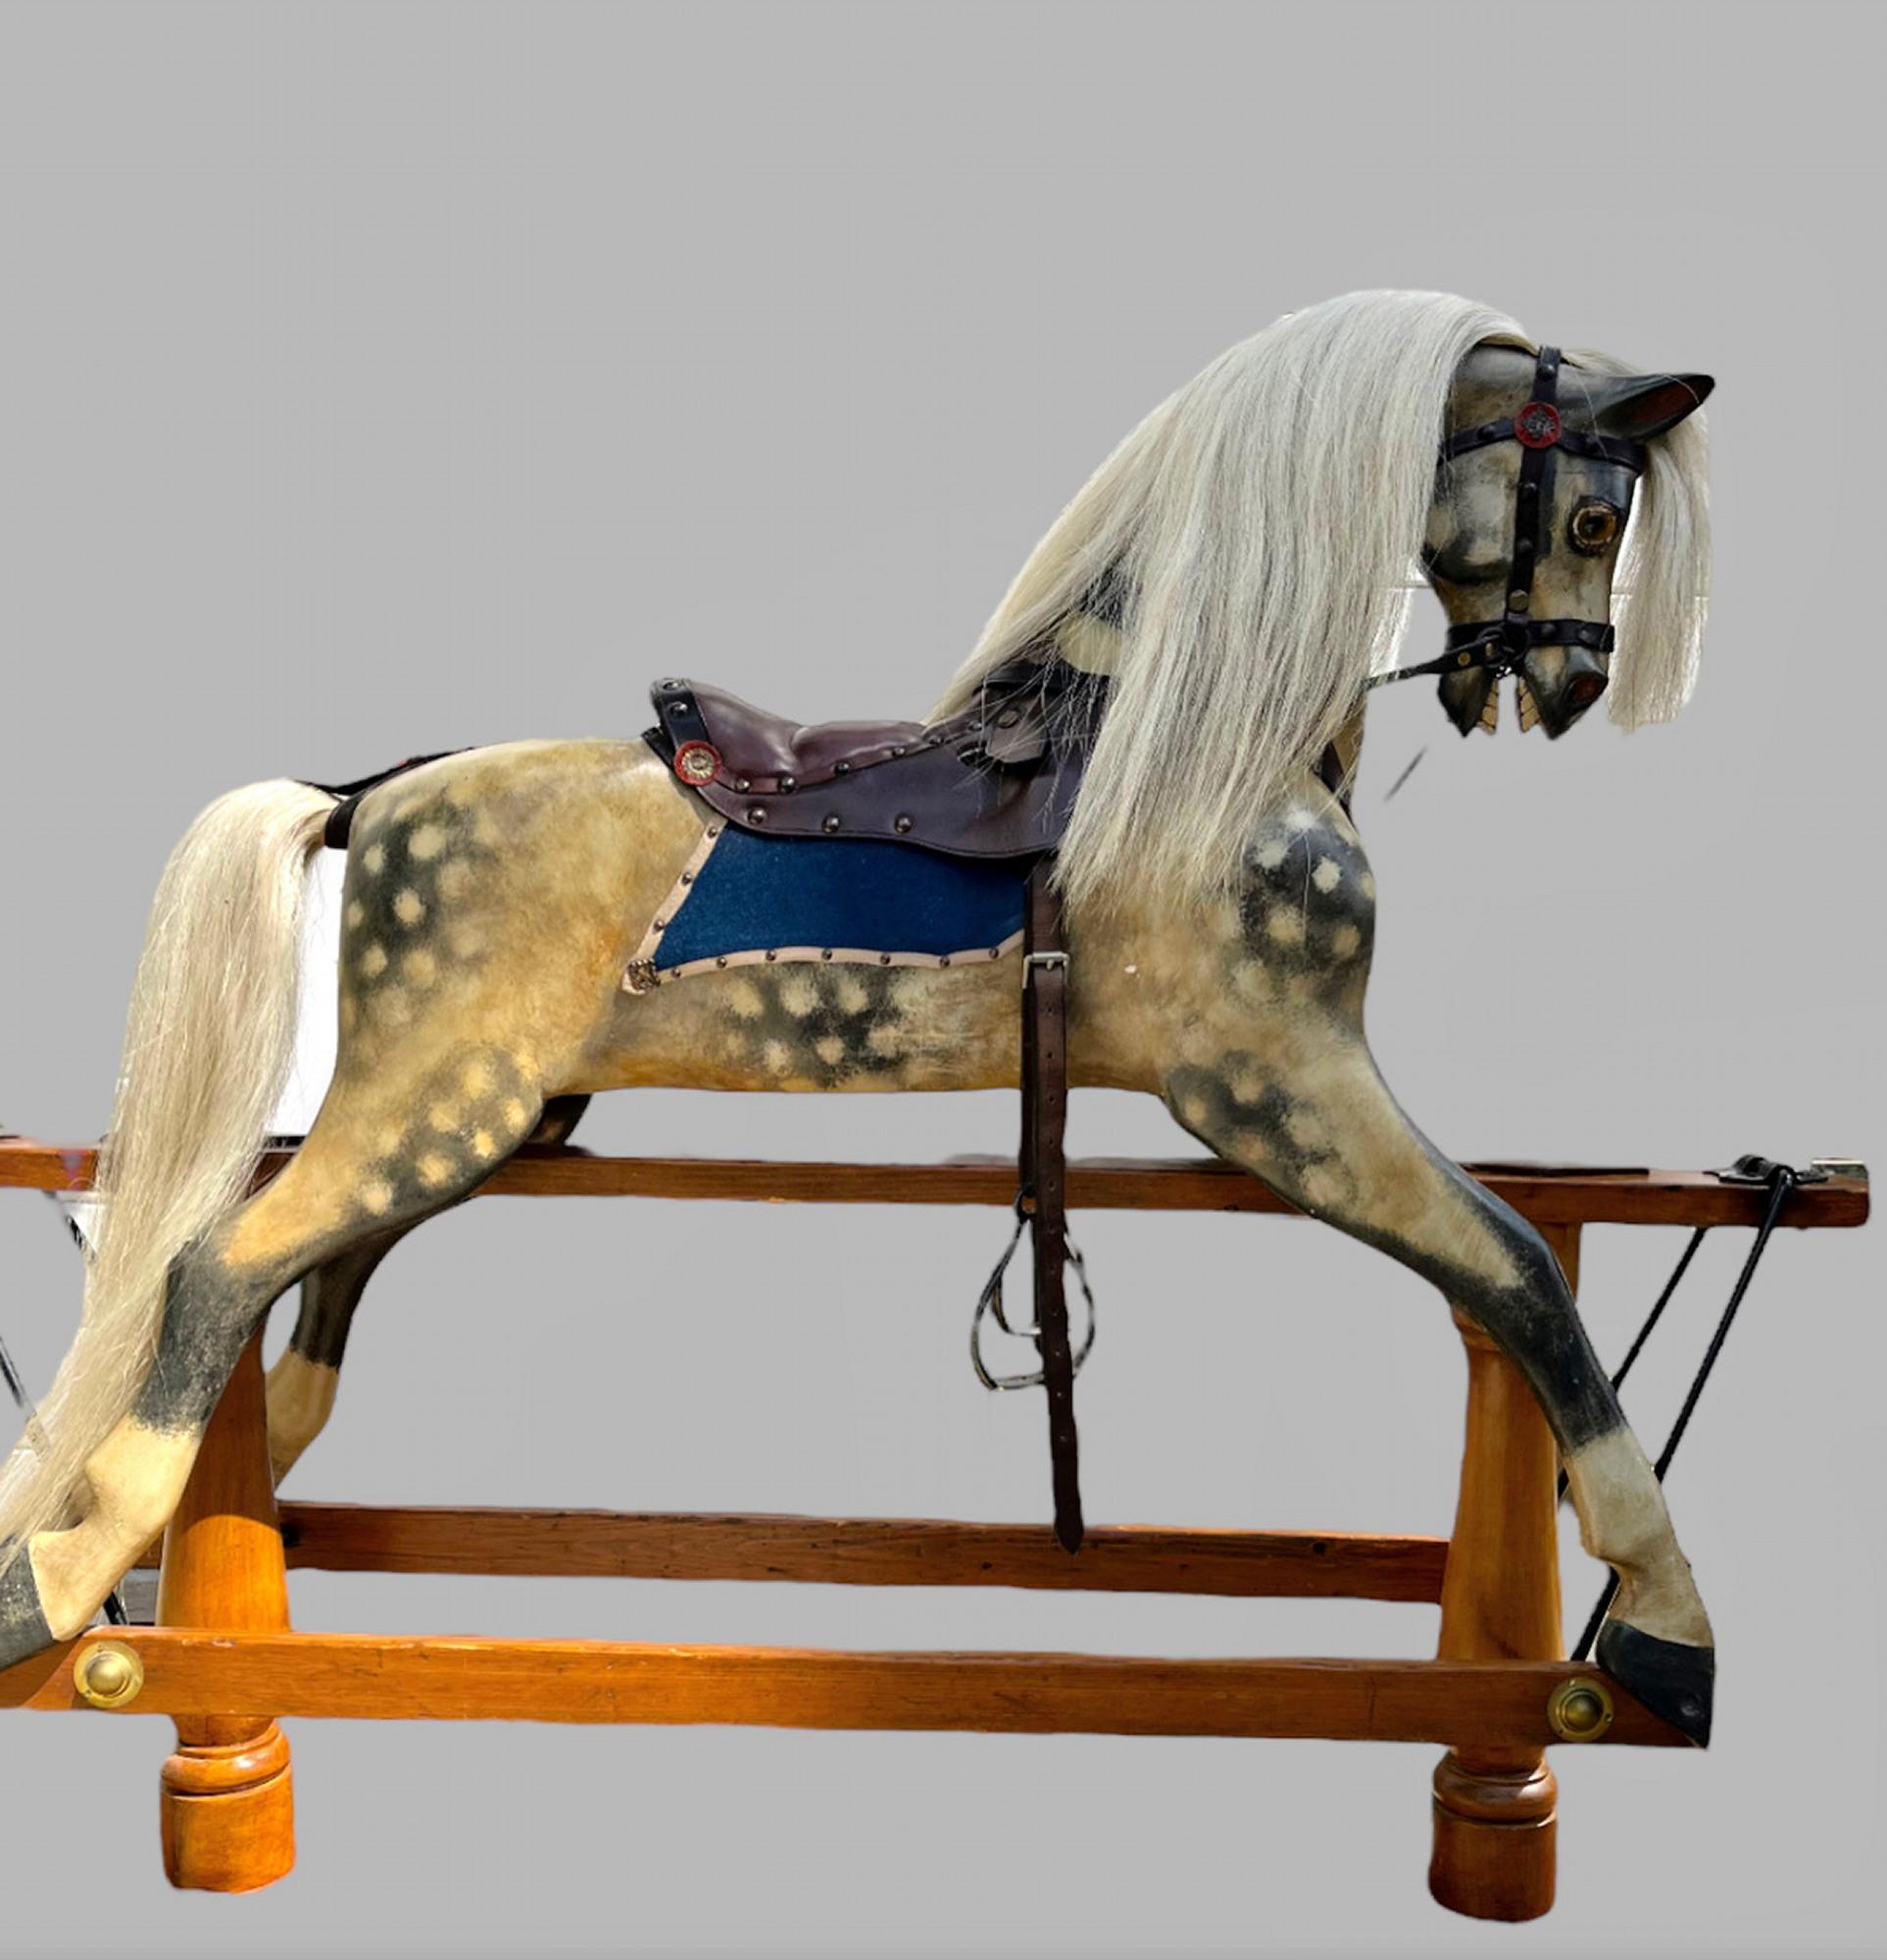 A Fabulous Pillar Stand Rocking Horse c 1880 , although no makers mark in considered opinion of expert in Rocking Horses its similar in construction to BCL (Liverpool Victorian Firm) but the detail carving and painting is superior.

The Rocking